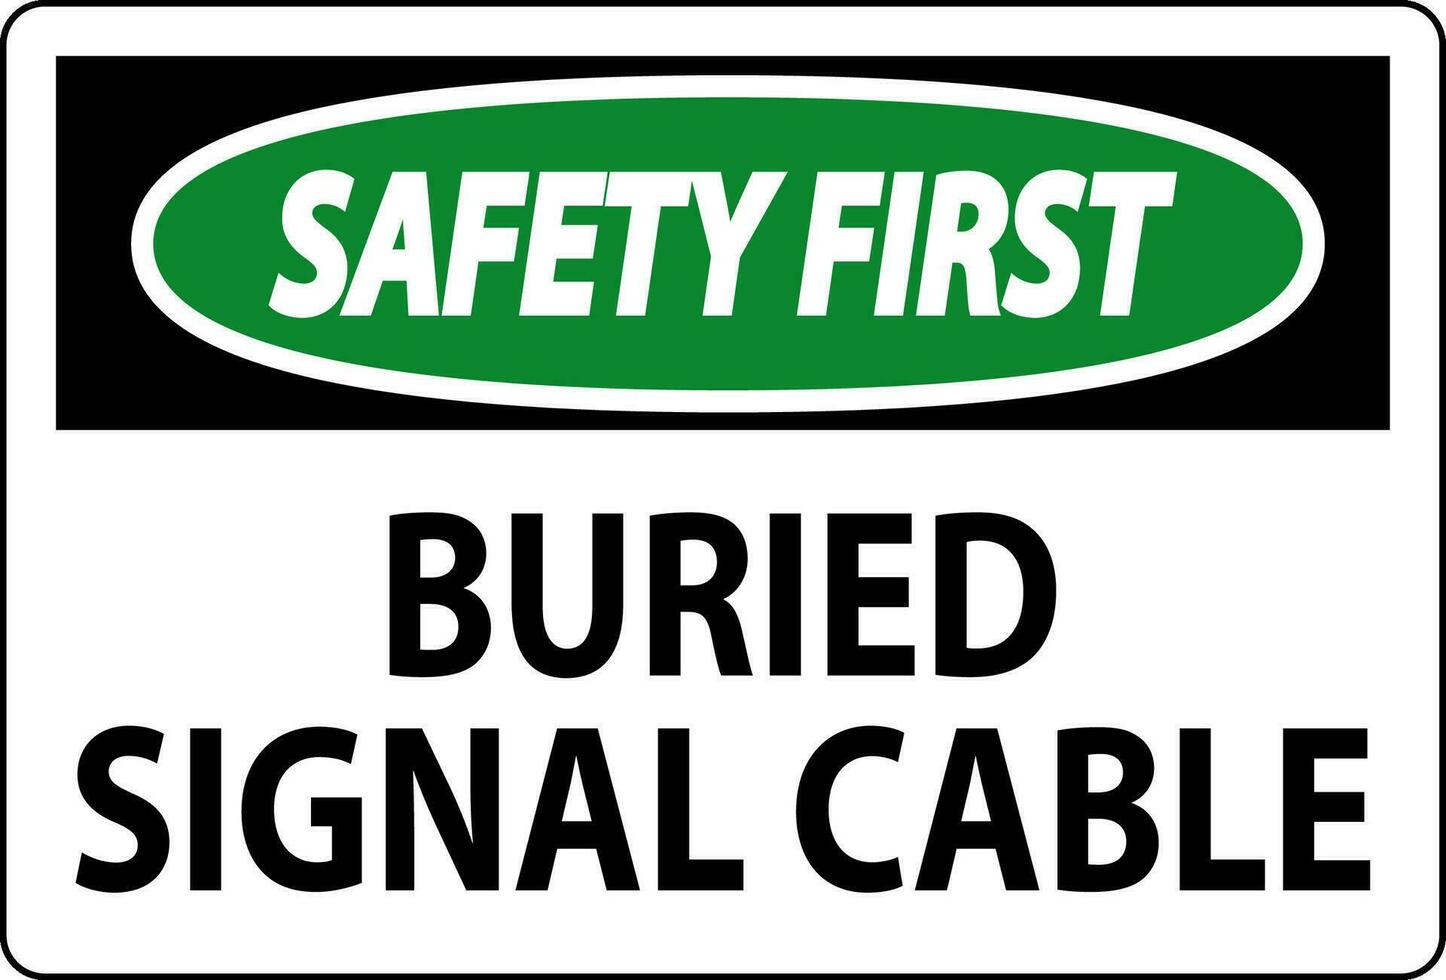 Safety First Sign, Buried Signal Cable Sign vector